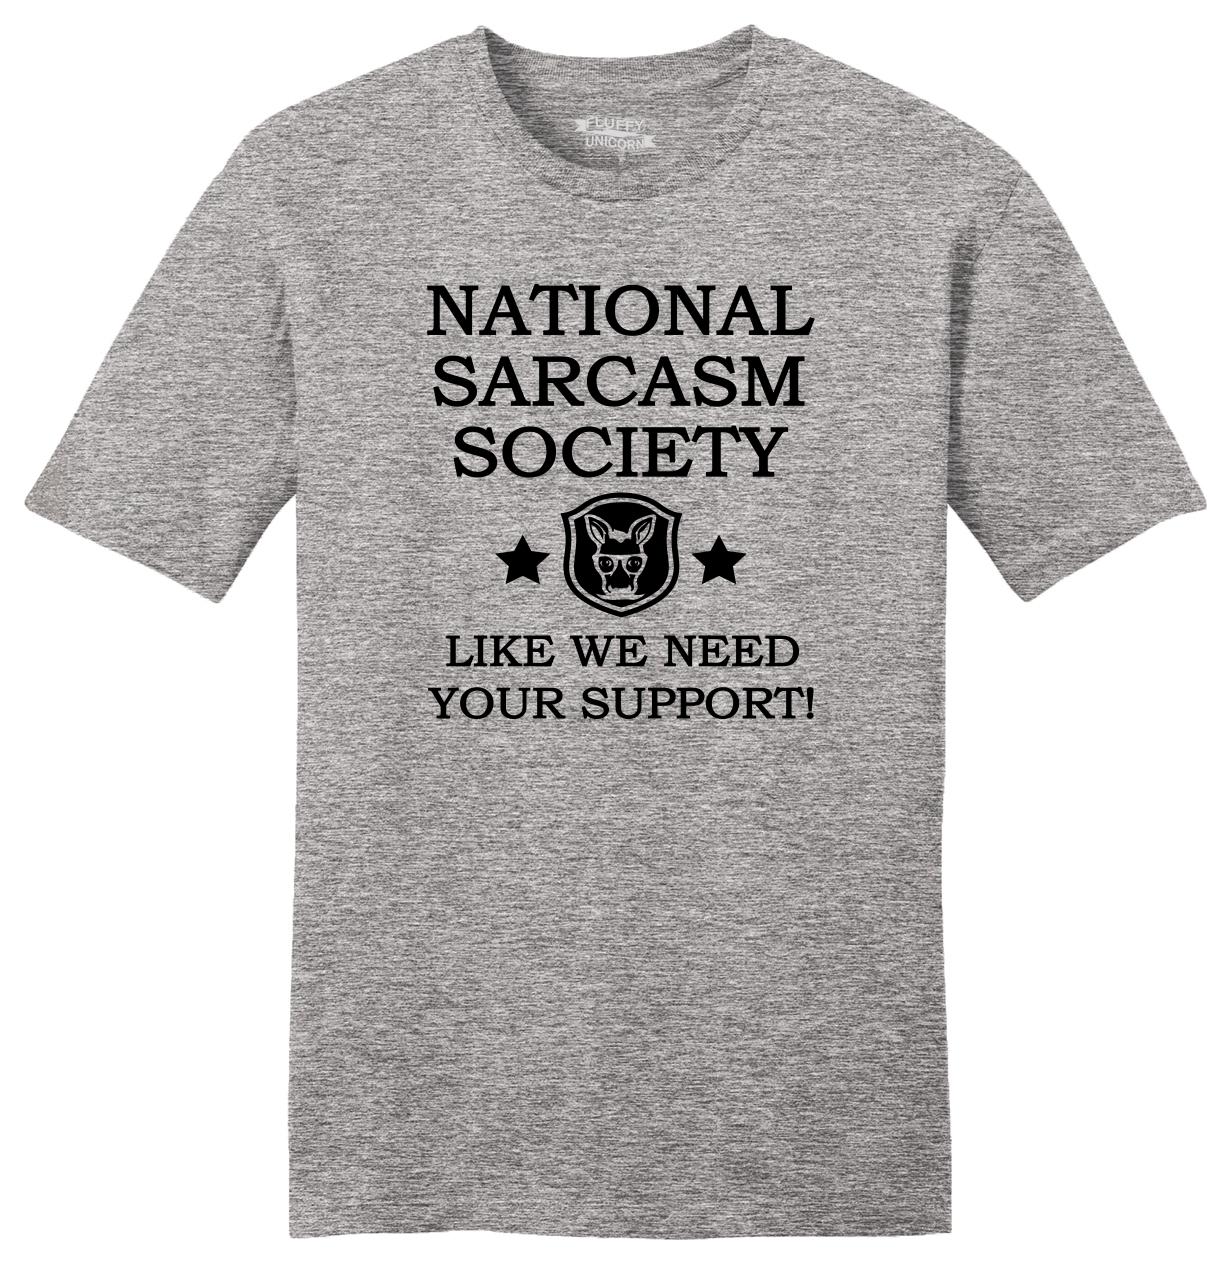 Men's Clothing T-Shirts FUNNY T-SHIRT S to 5XL LIKE WE NEED YOUR SUPPORT  NATIONAL SARCASM SOCIETY